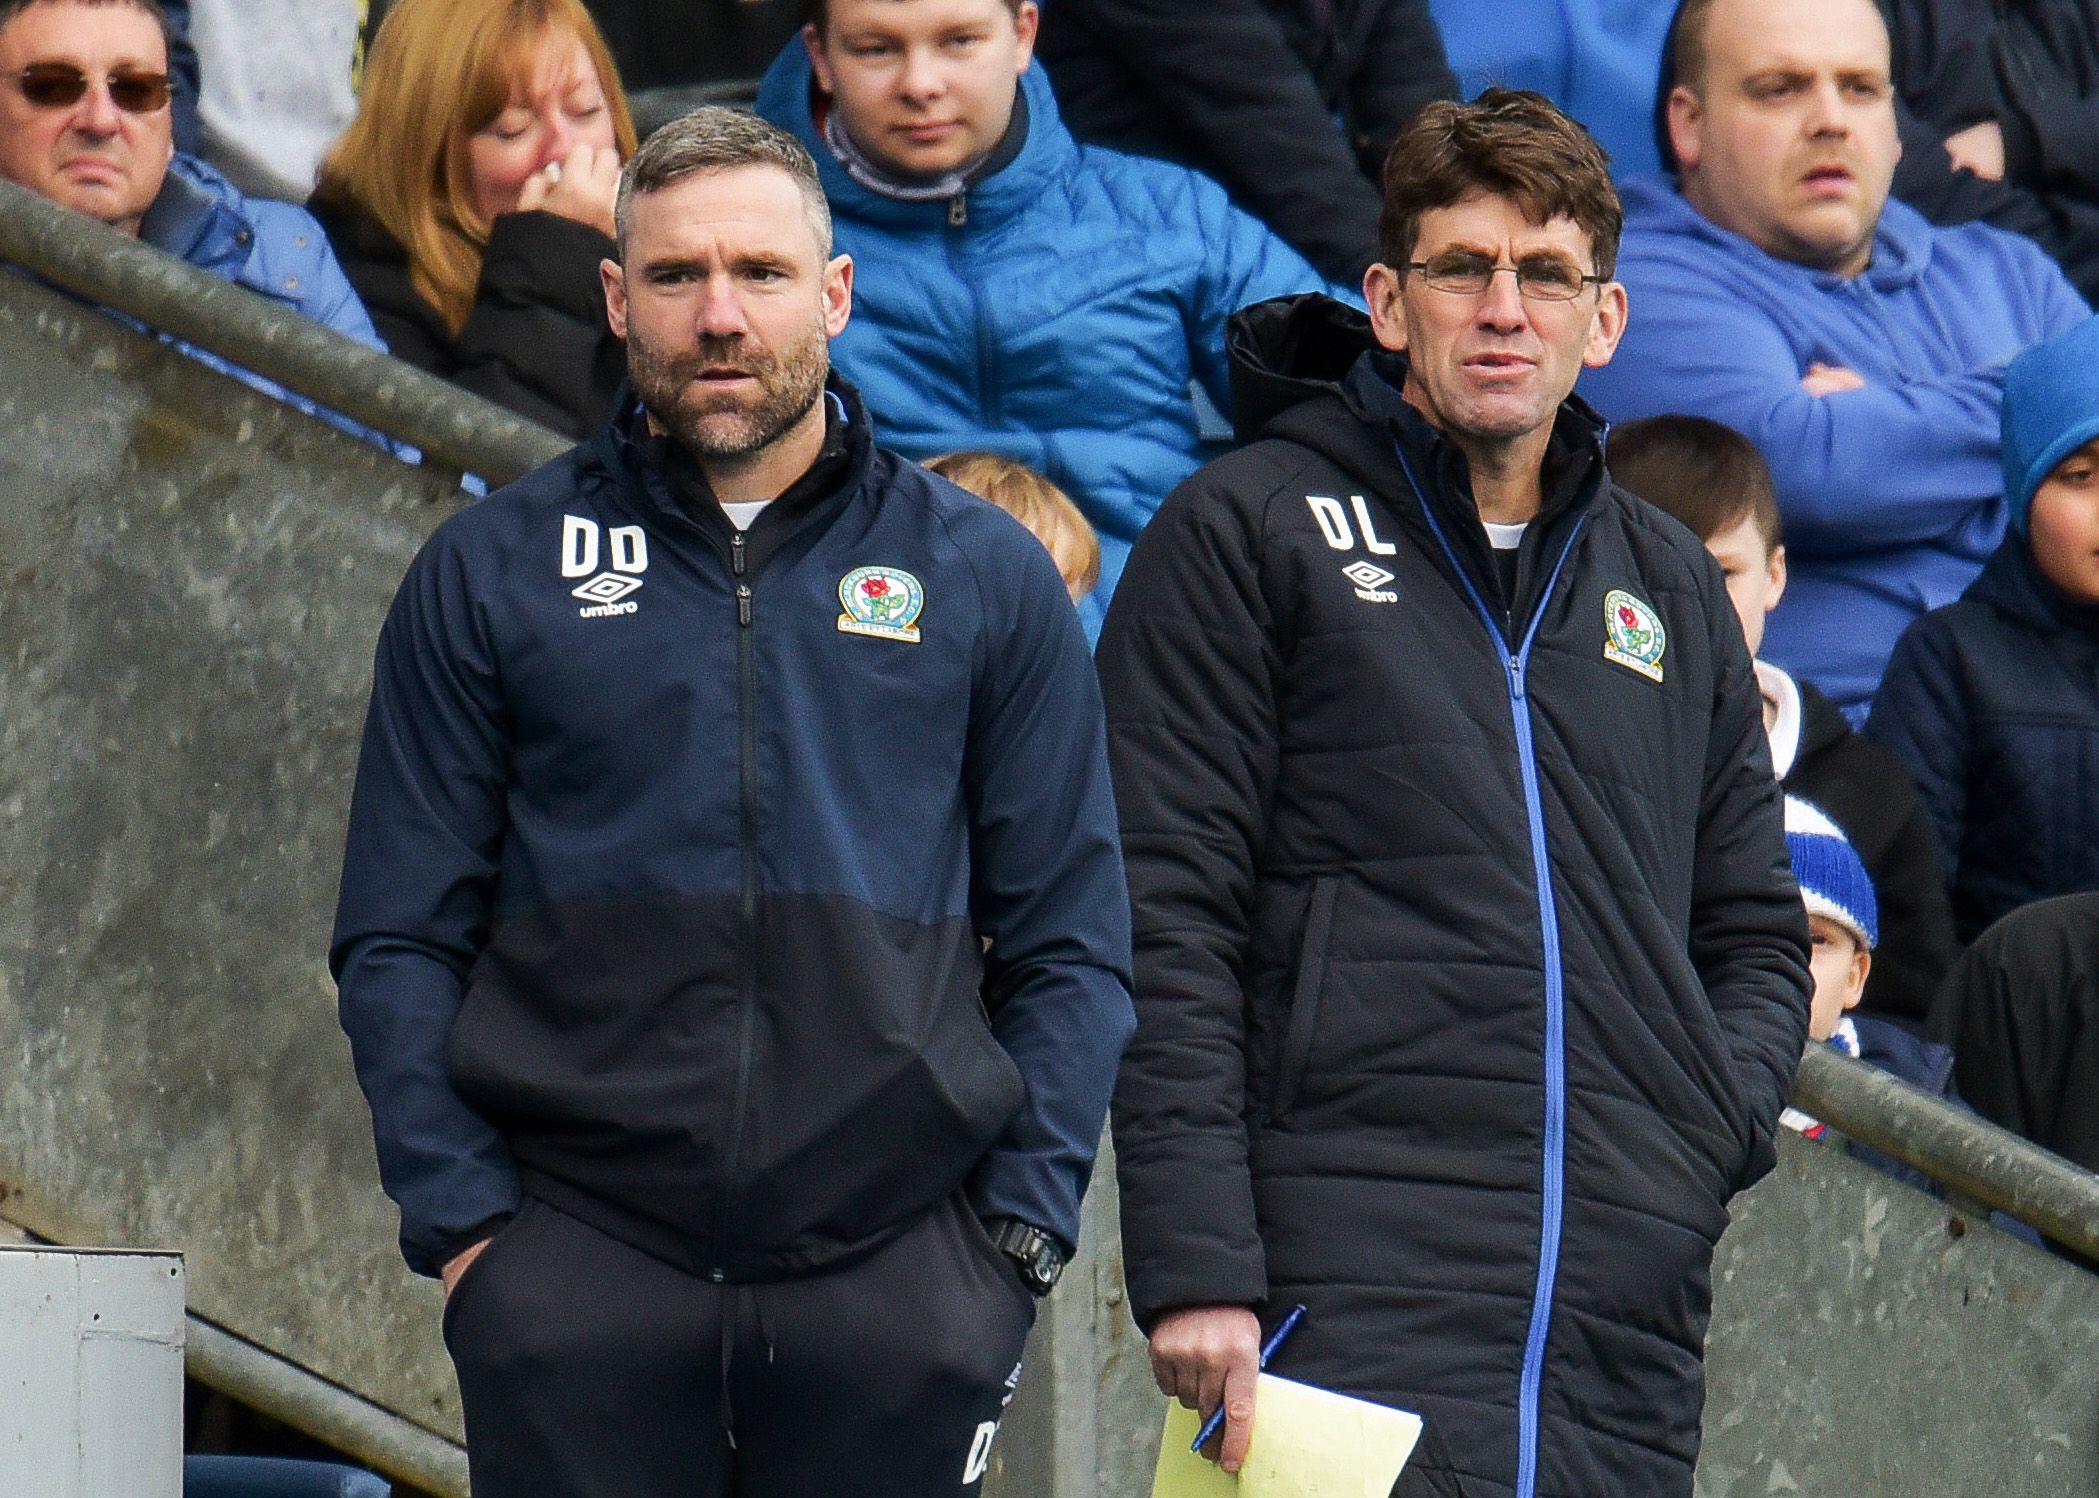 Britain Soccer Football - Blackburn Rovers v Wigan Athletic - Sky Bet Championship - Ewood Park - 4/3/17 Blackburn Rovers first team coach David Dunn and assistant manager David Lowe Mandatory Credit: Action Images / Paul Burrows Livepic EDITORIAL USE ONLY. No use with unauthorized audio, video, data, fixture lists, club/league logos or 